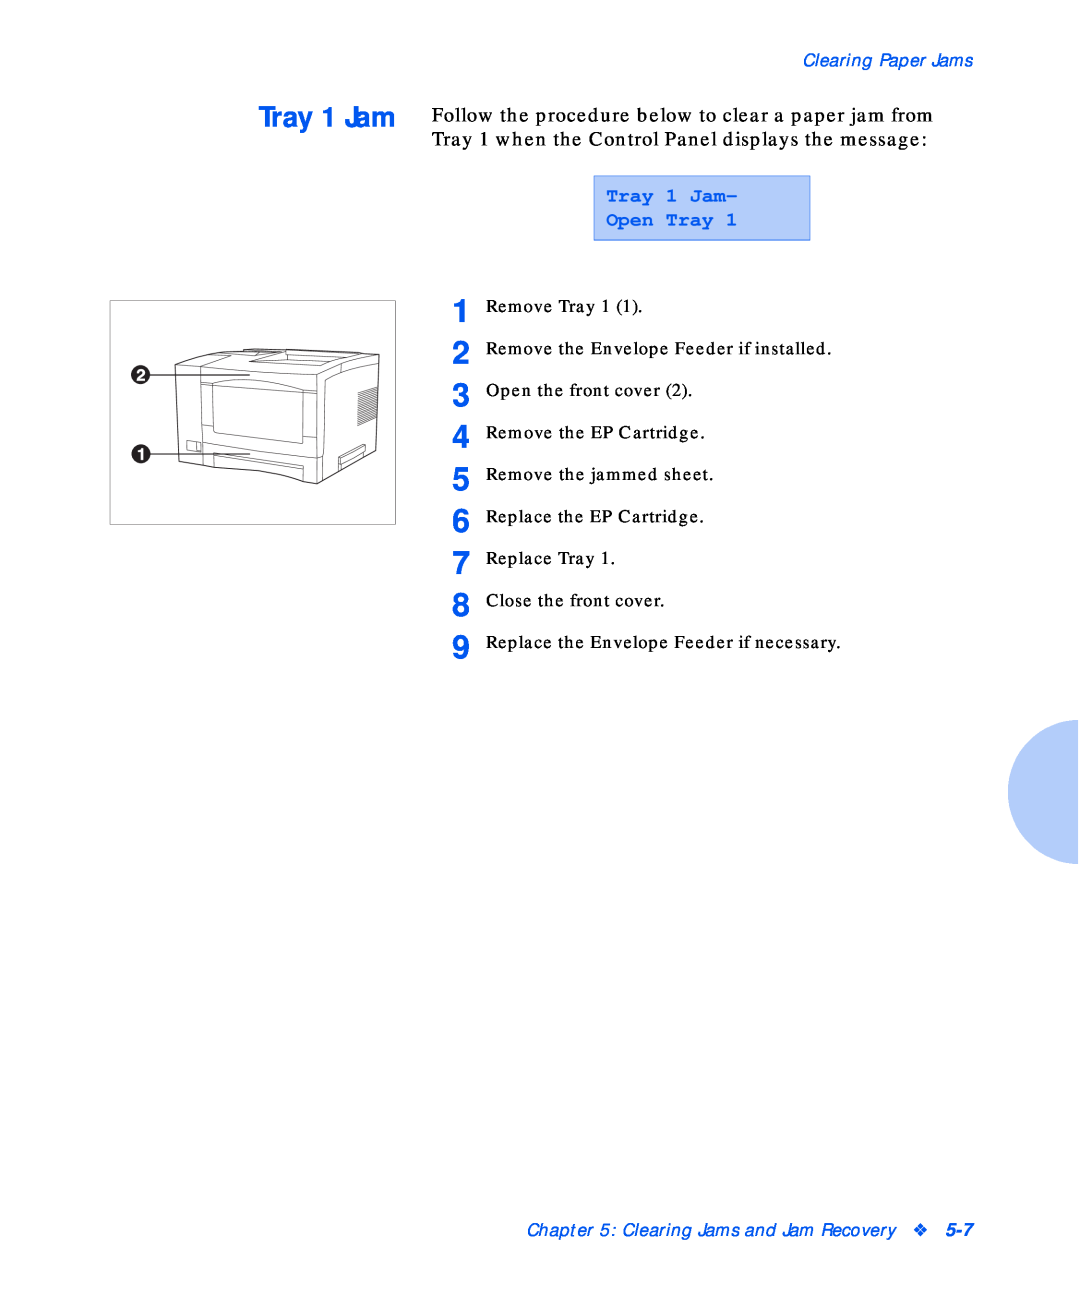 Xerox N17b manual Tray 1 Jam Open Tray, Clearing Paper Jams, Clearing Jams and Jam Recovery 